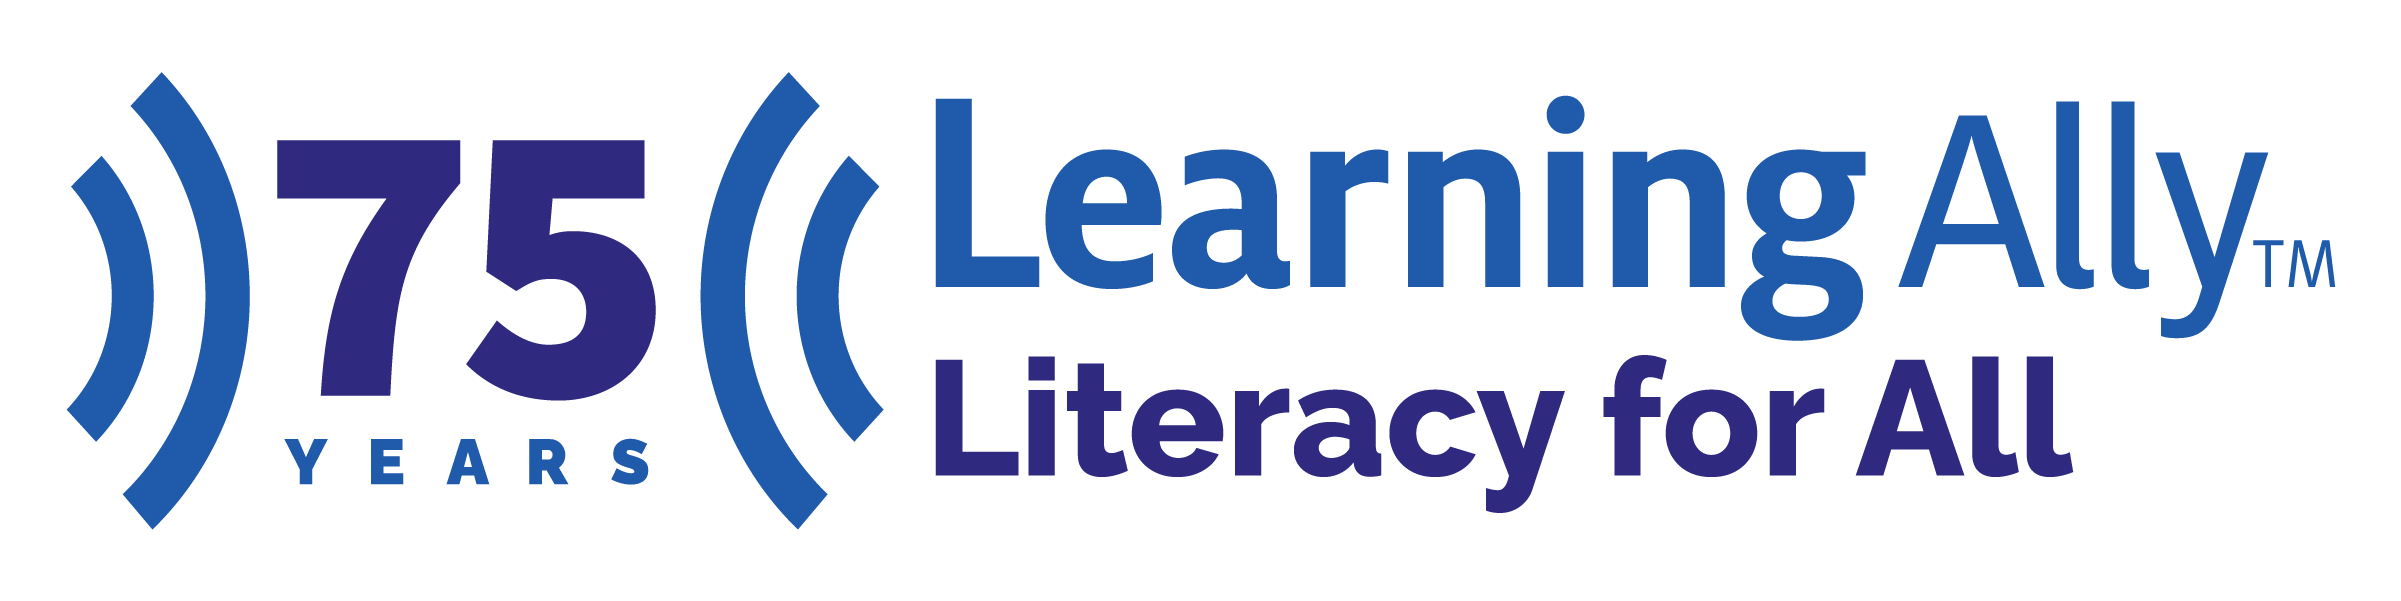 75 Years of Literacy for All